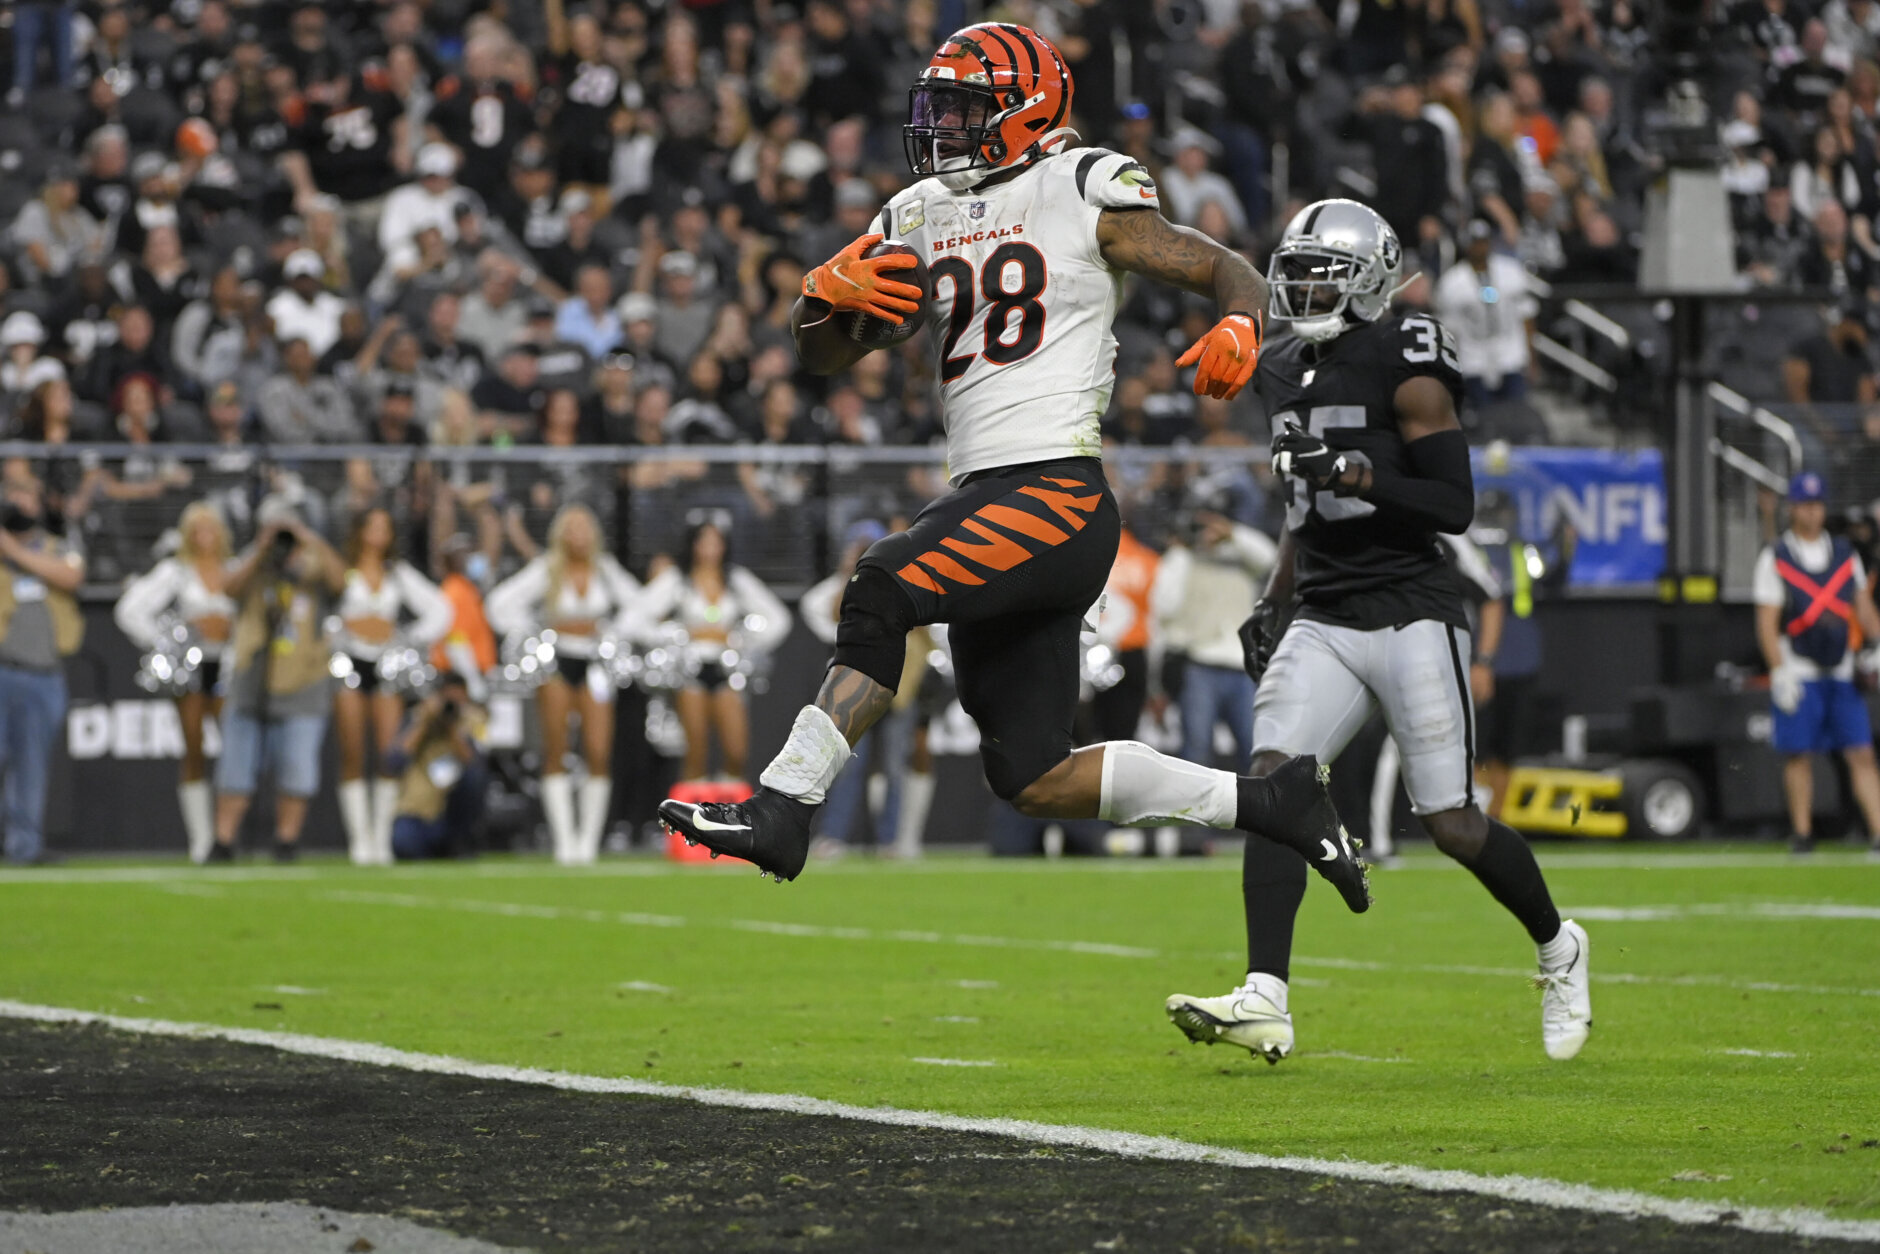 <p><em><strong>Bengals 32</strong></em><br />
<em><strong>Raiders 13</strong></em></p>
<p>This is forever the Carson Palmer Bowl in my mind, but it was a running back that was the main attraction in Las Vegas &#8212; Joe Mixon has scored in seven straight games and looks like the key to Cincinnati staying relevant in the AFC playoff picture.</p>
